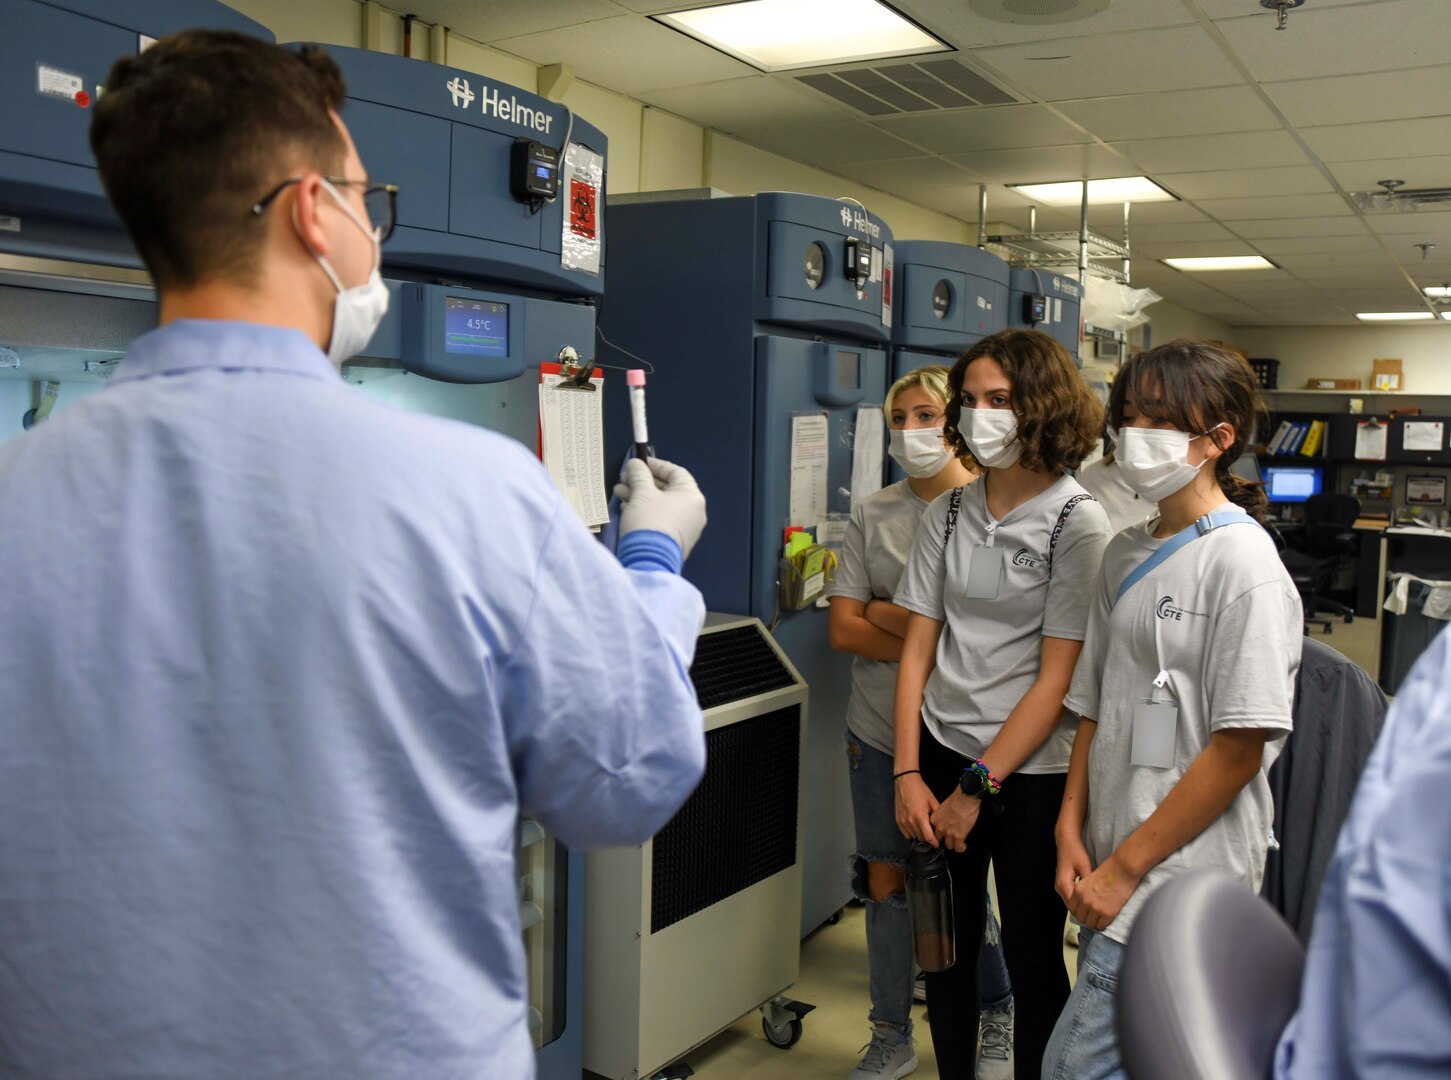 Laboratory staff demonstrate lab testing procedures to high school students on June 16, 2022. Naval Medical Center Camp Lejeune's Lab recently received a compliance rate of 99.9% on their recent inspection from the College of American Pathologists.